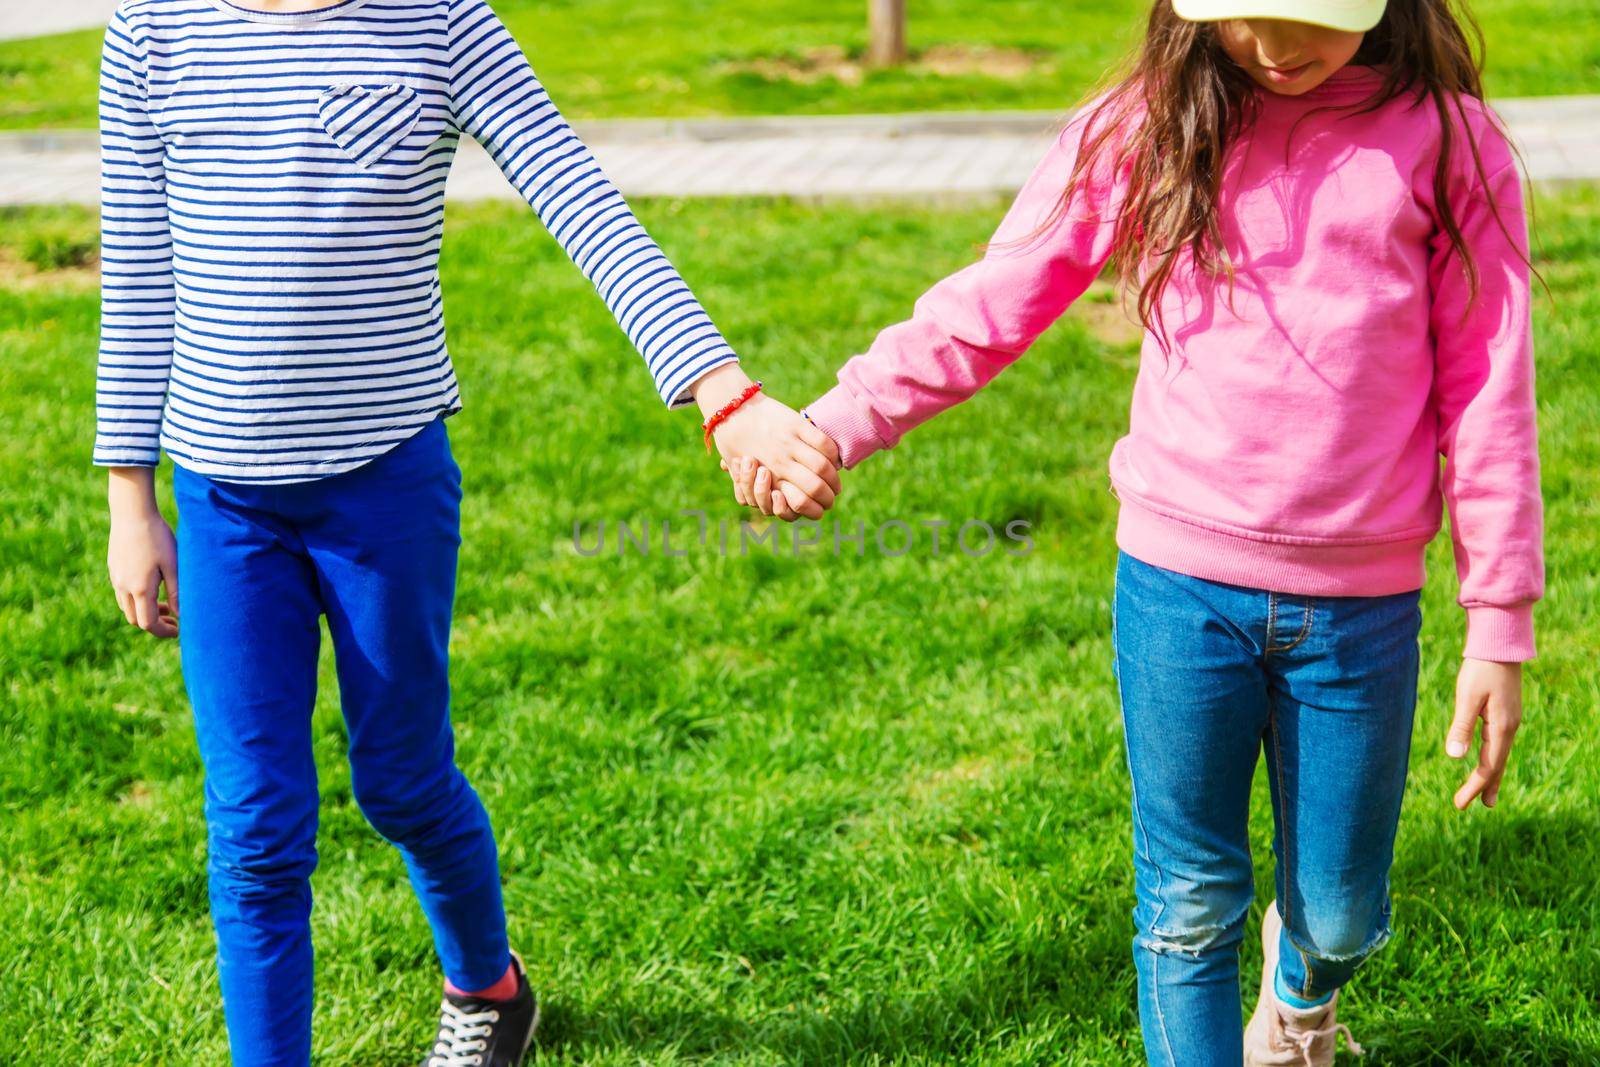 children holding hands in the park.selective focus.kids